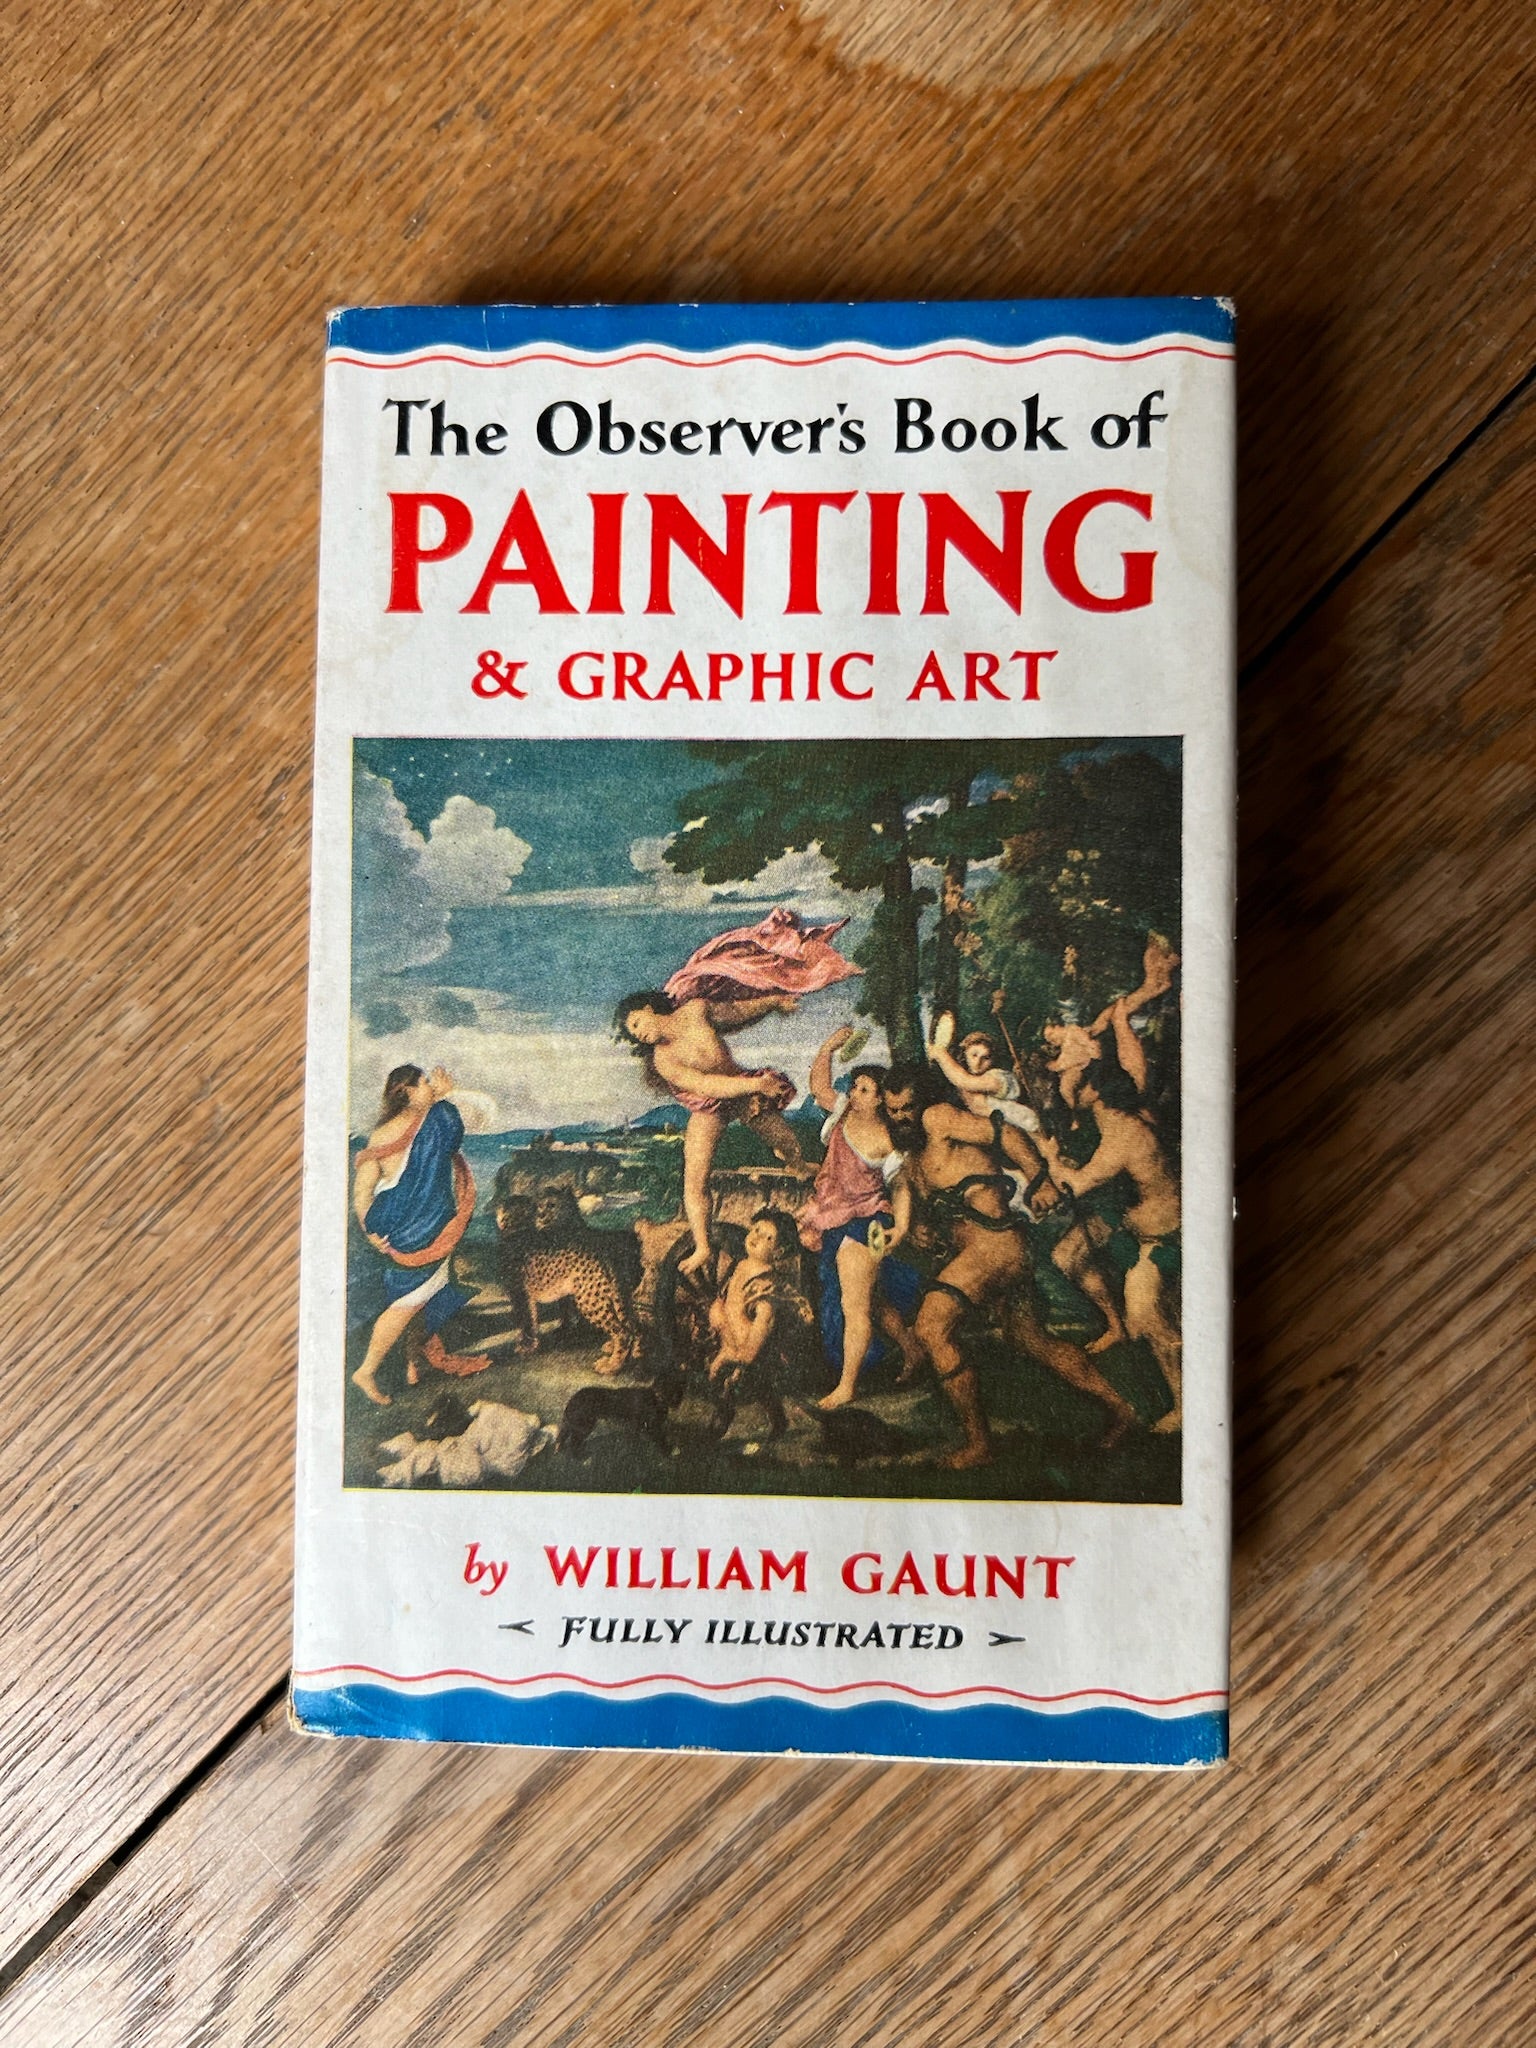 The Observers Book Of Painting & Graphic Art, William Gaunt